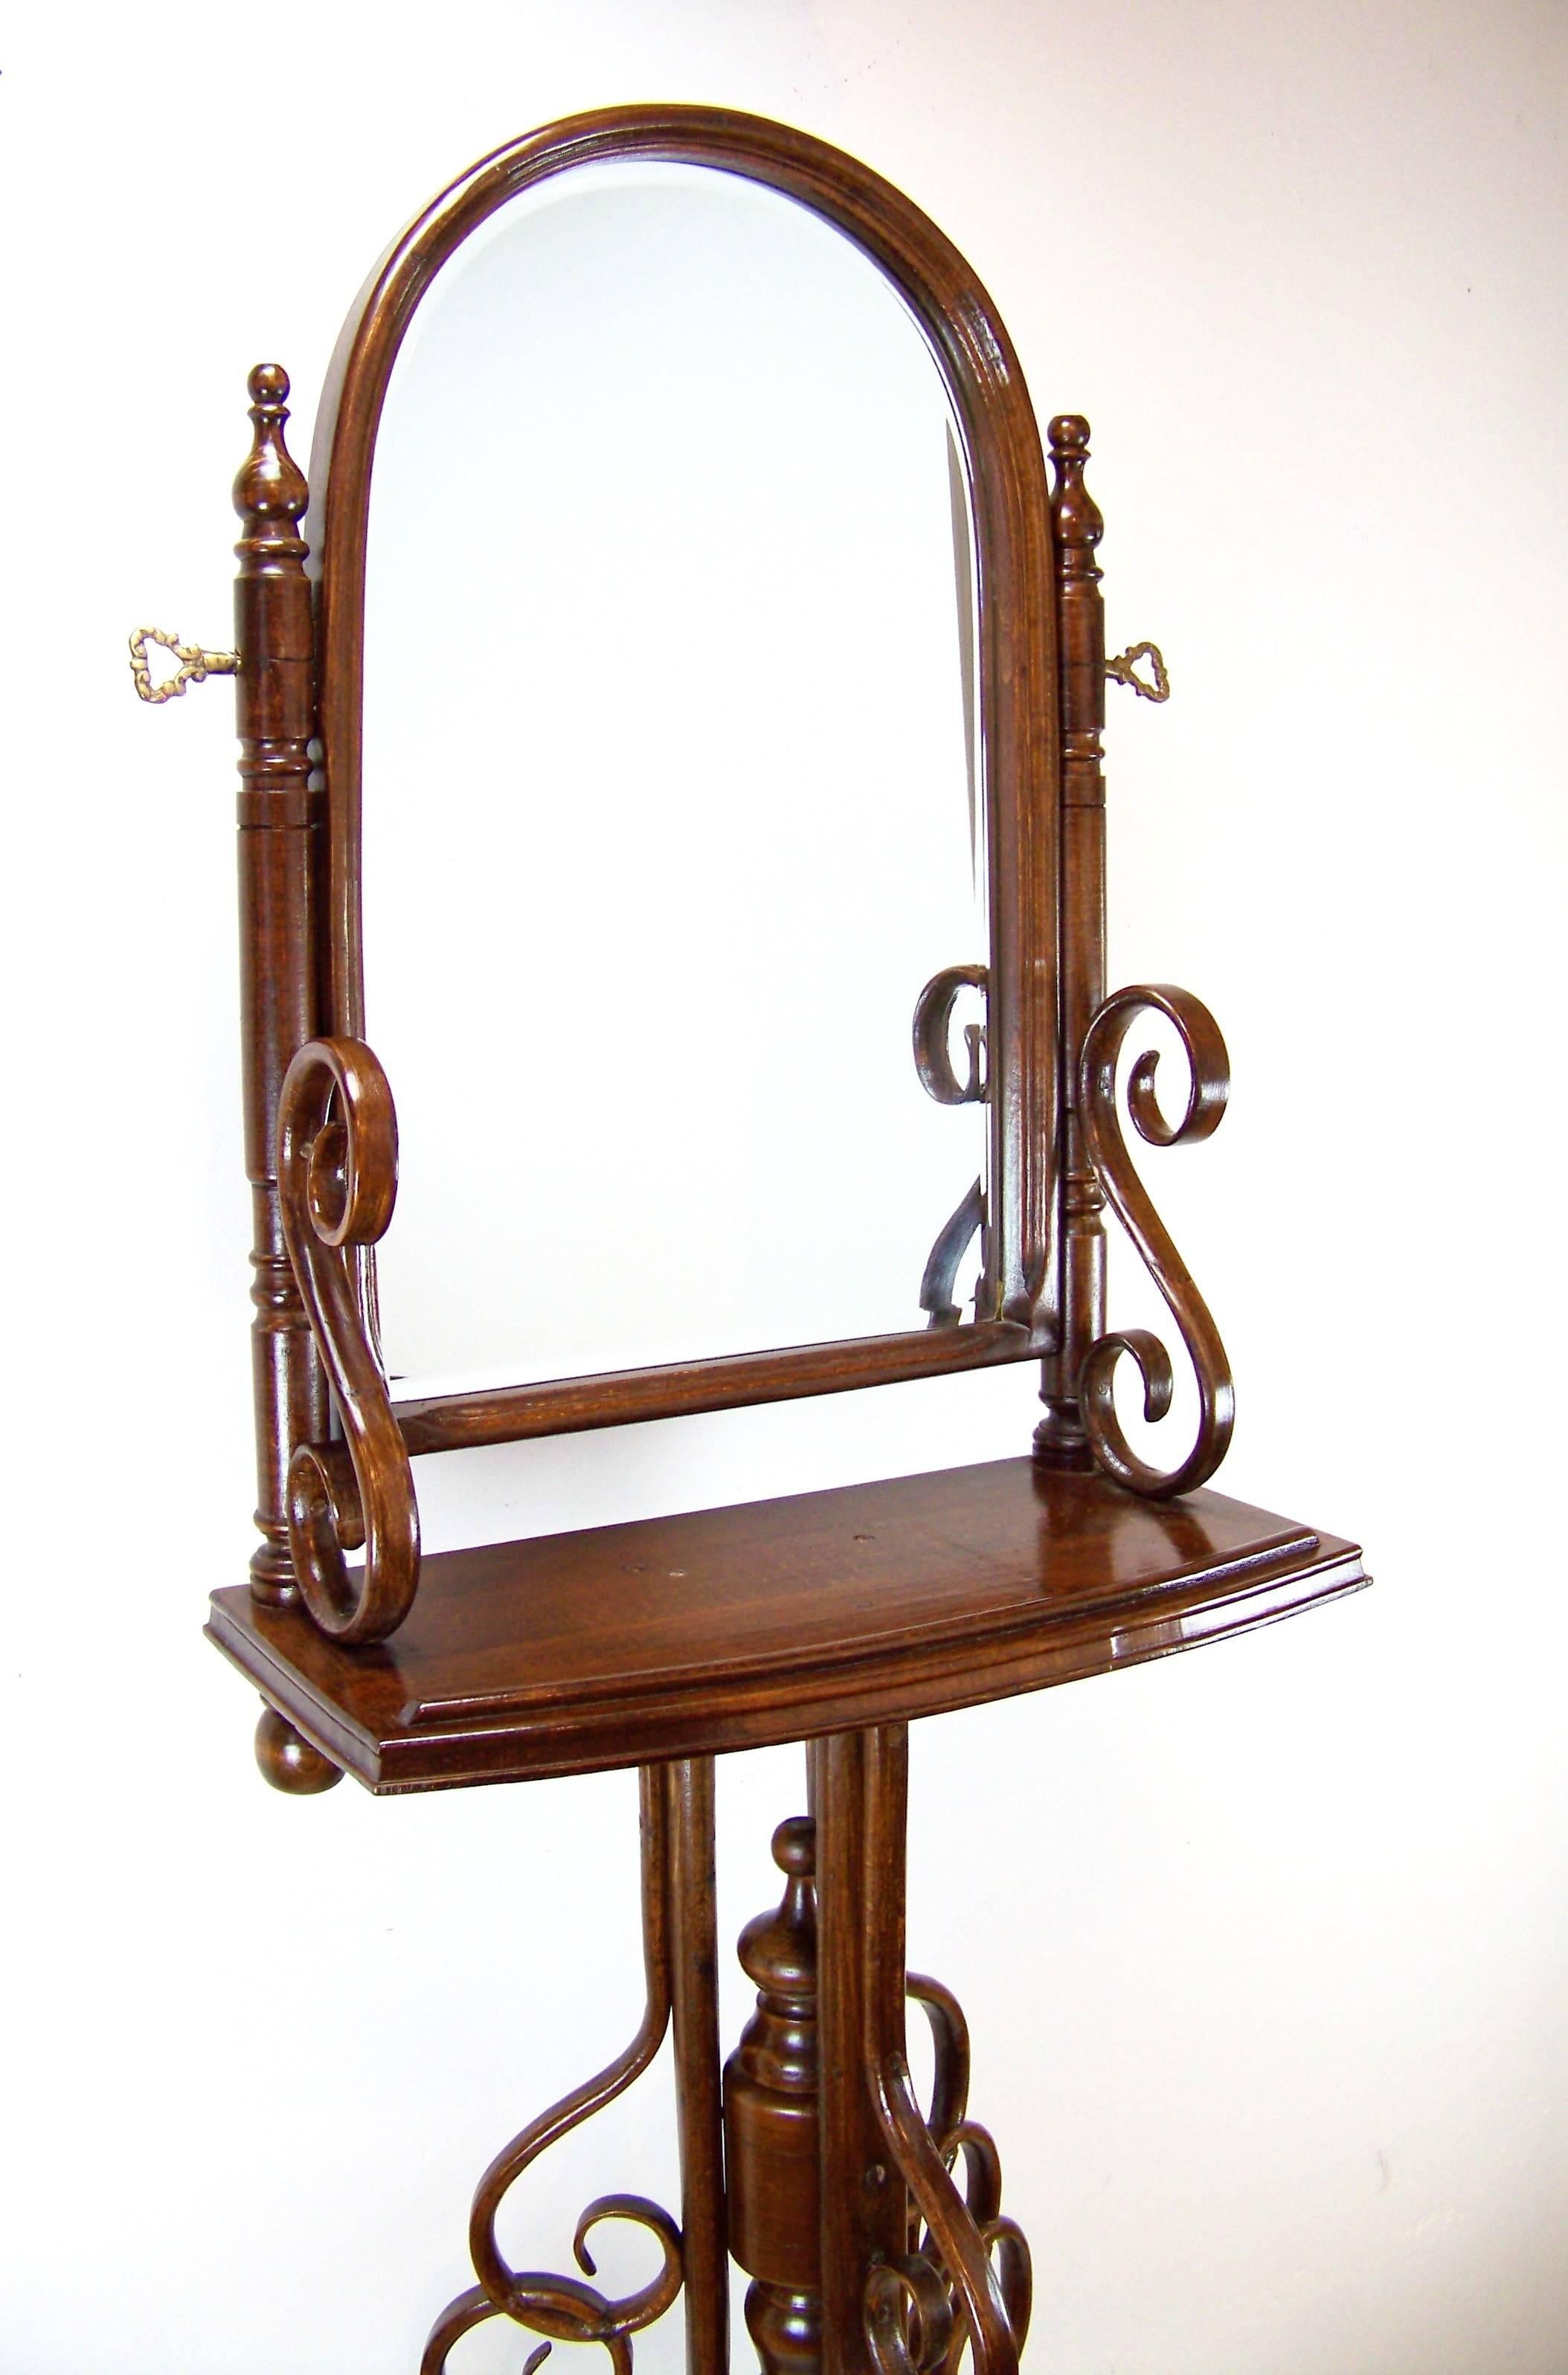 Austrian Dressing Table in the Style of Thonet, circa 1880